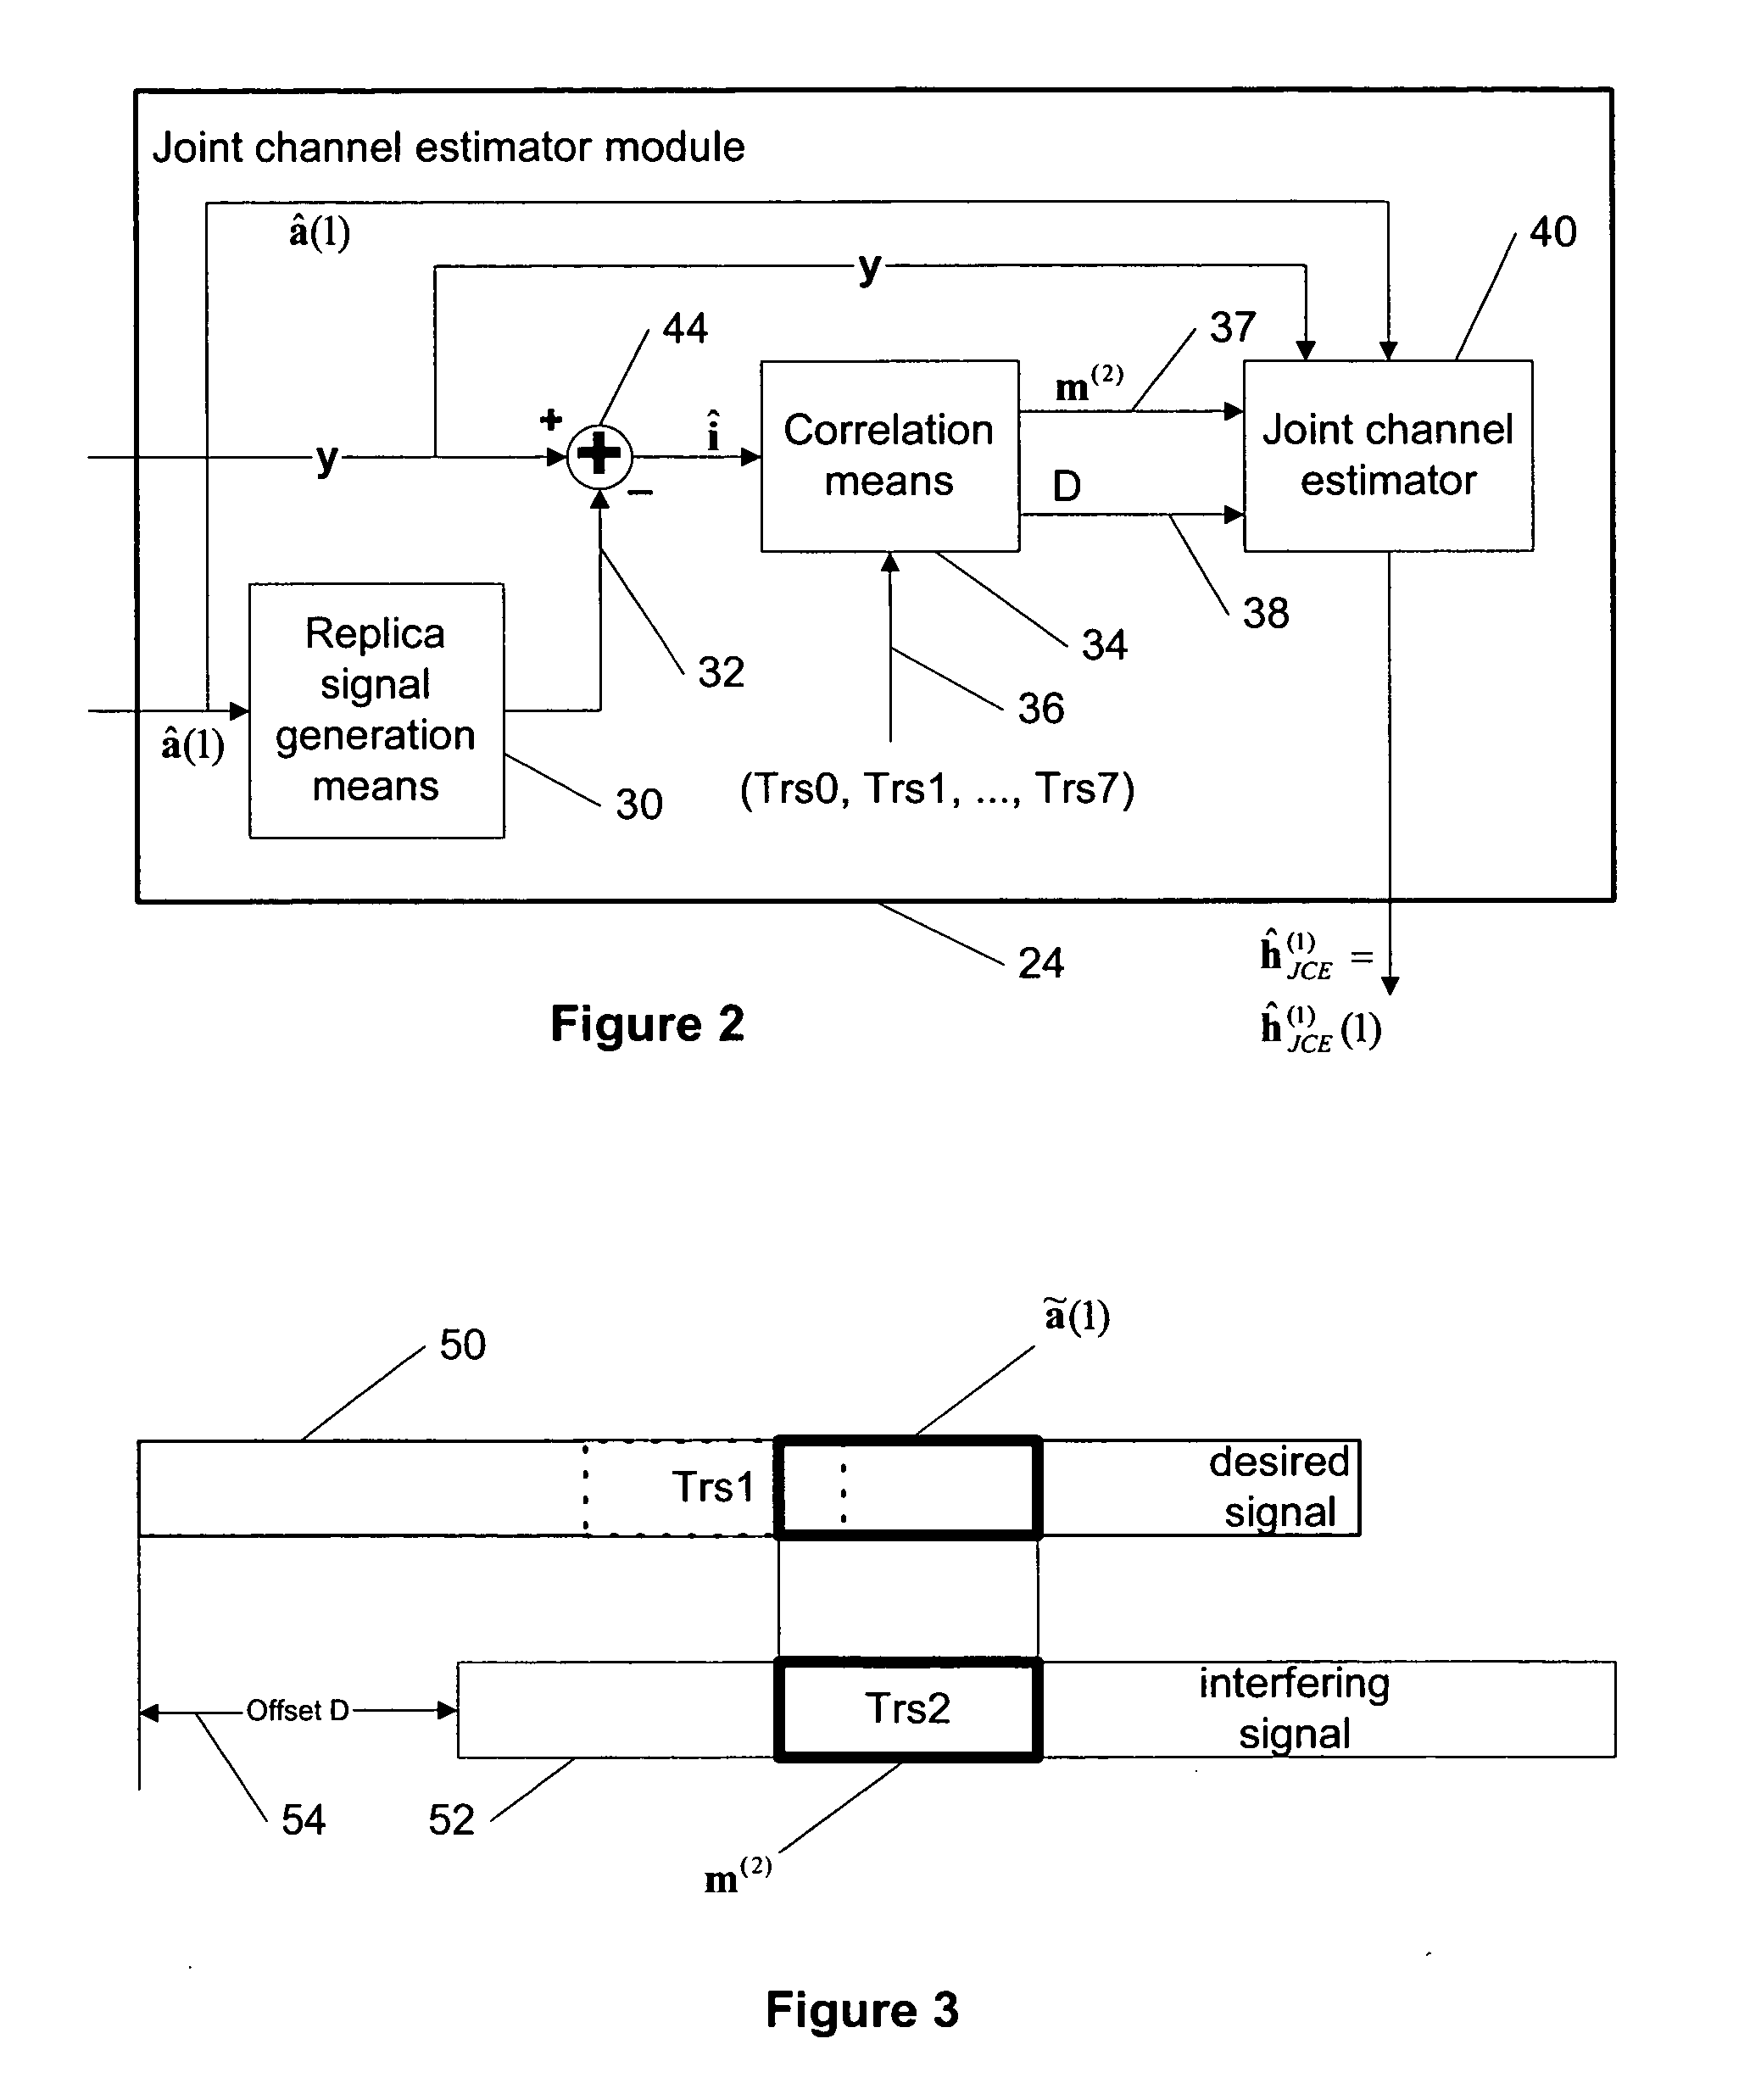 Joint channel estimator for synchronous and asynchronous interference suppression in SAIC receiver